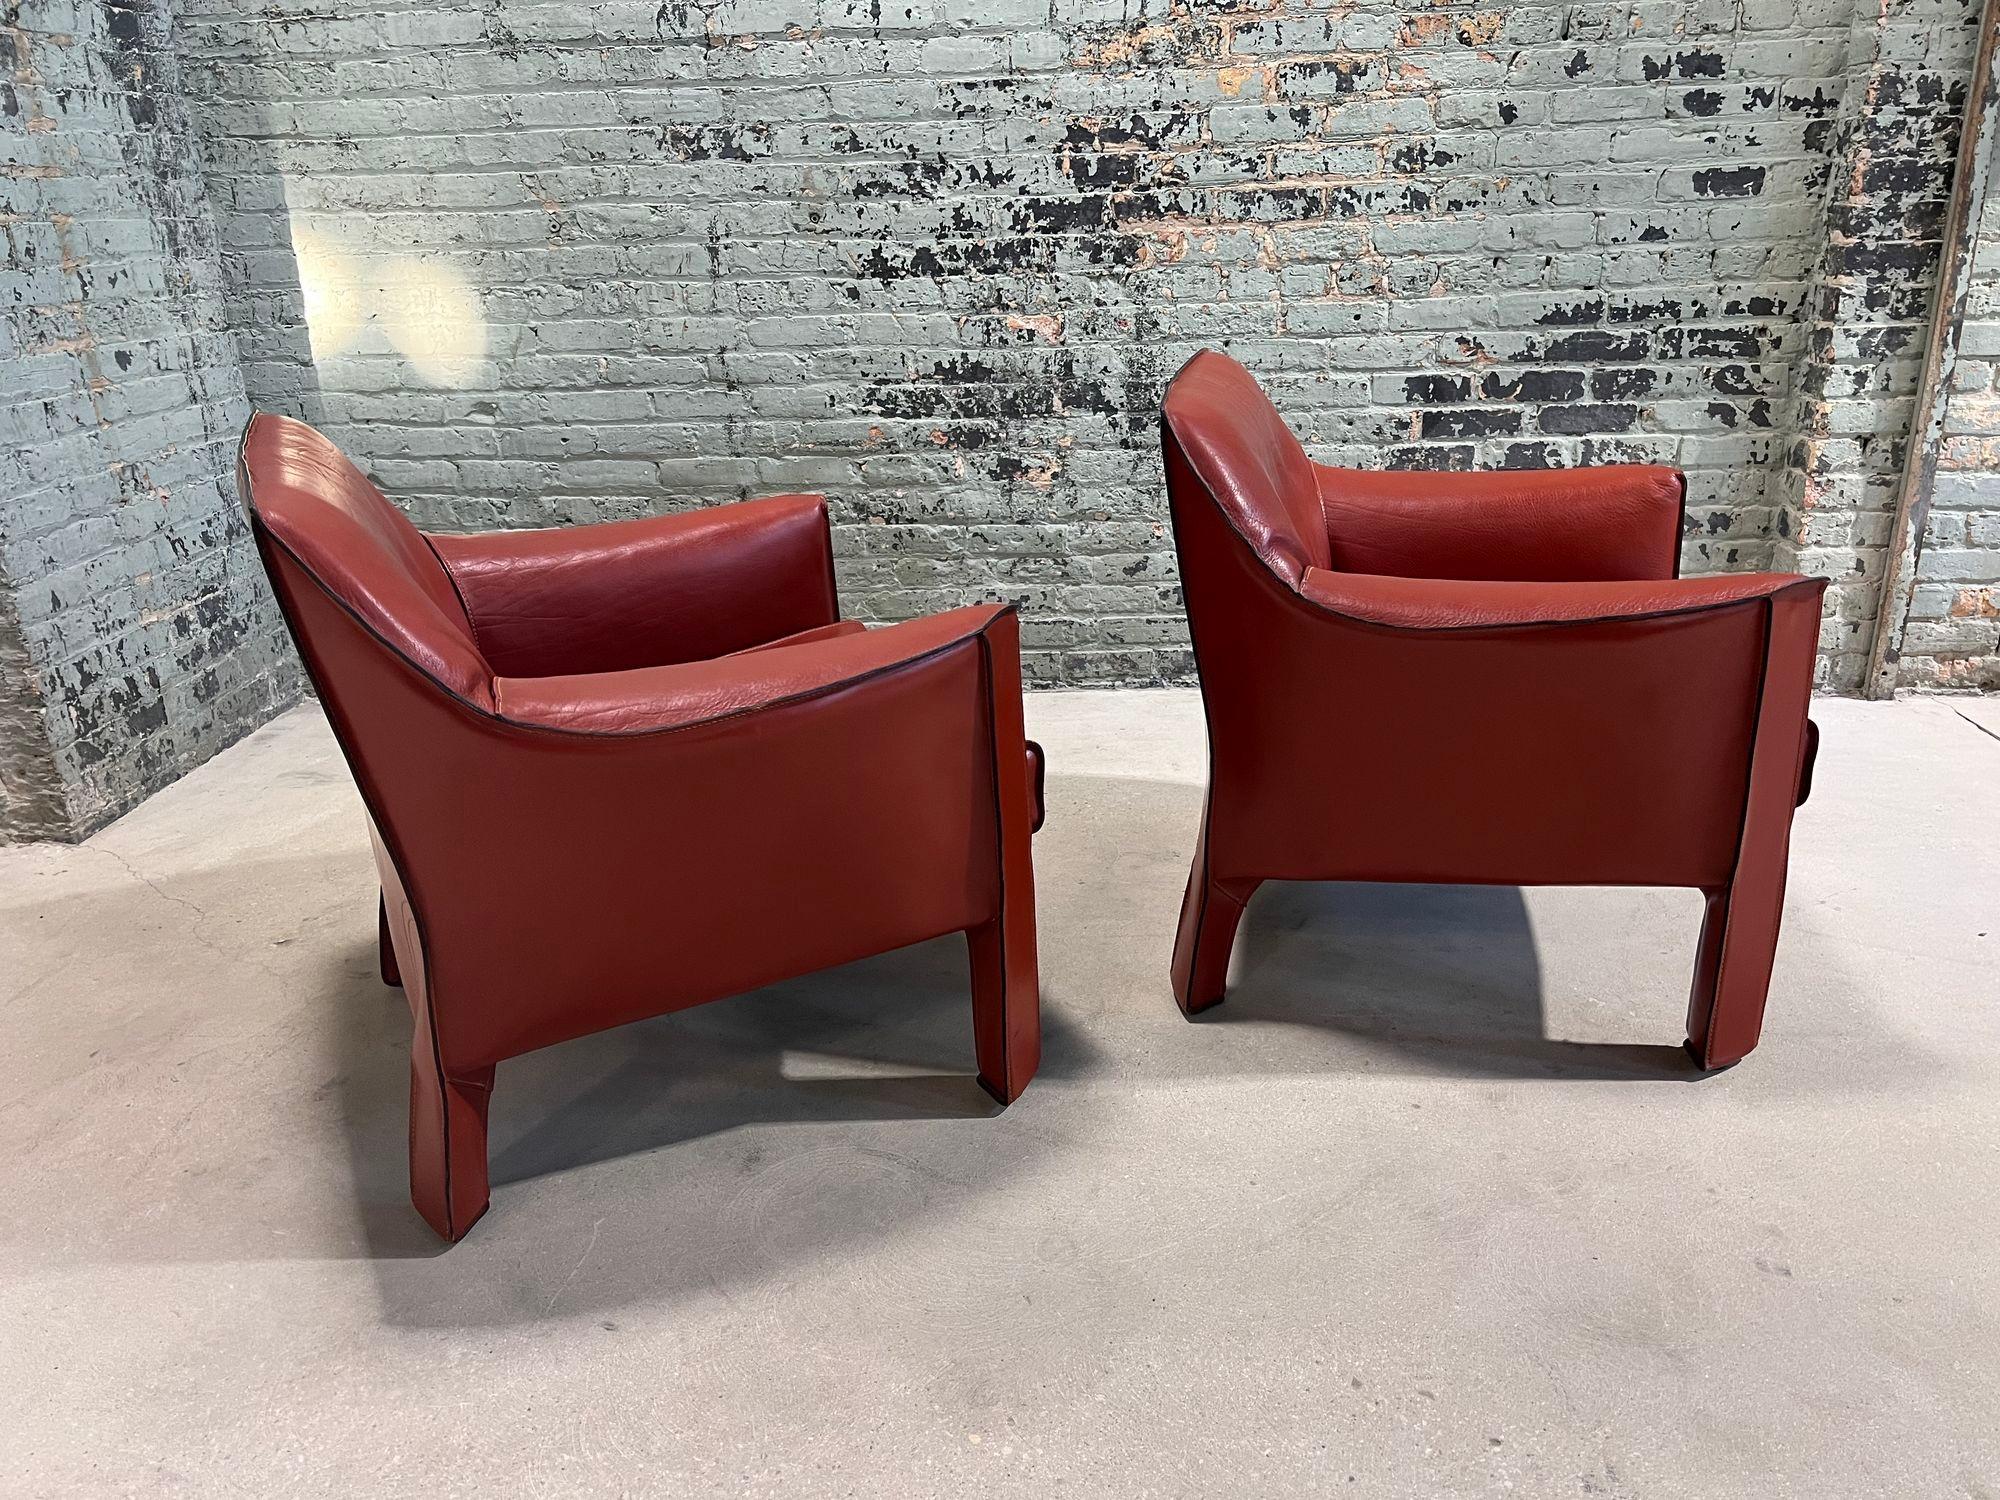 Steel Mario Bellini Pair Leather Cab Lounge Chairs, Model 415, Italy 1970 For Sale